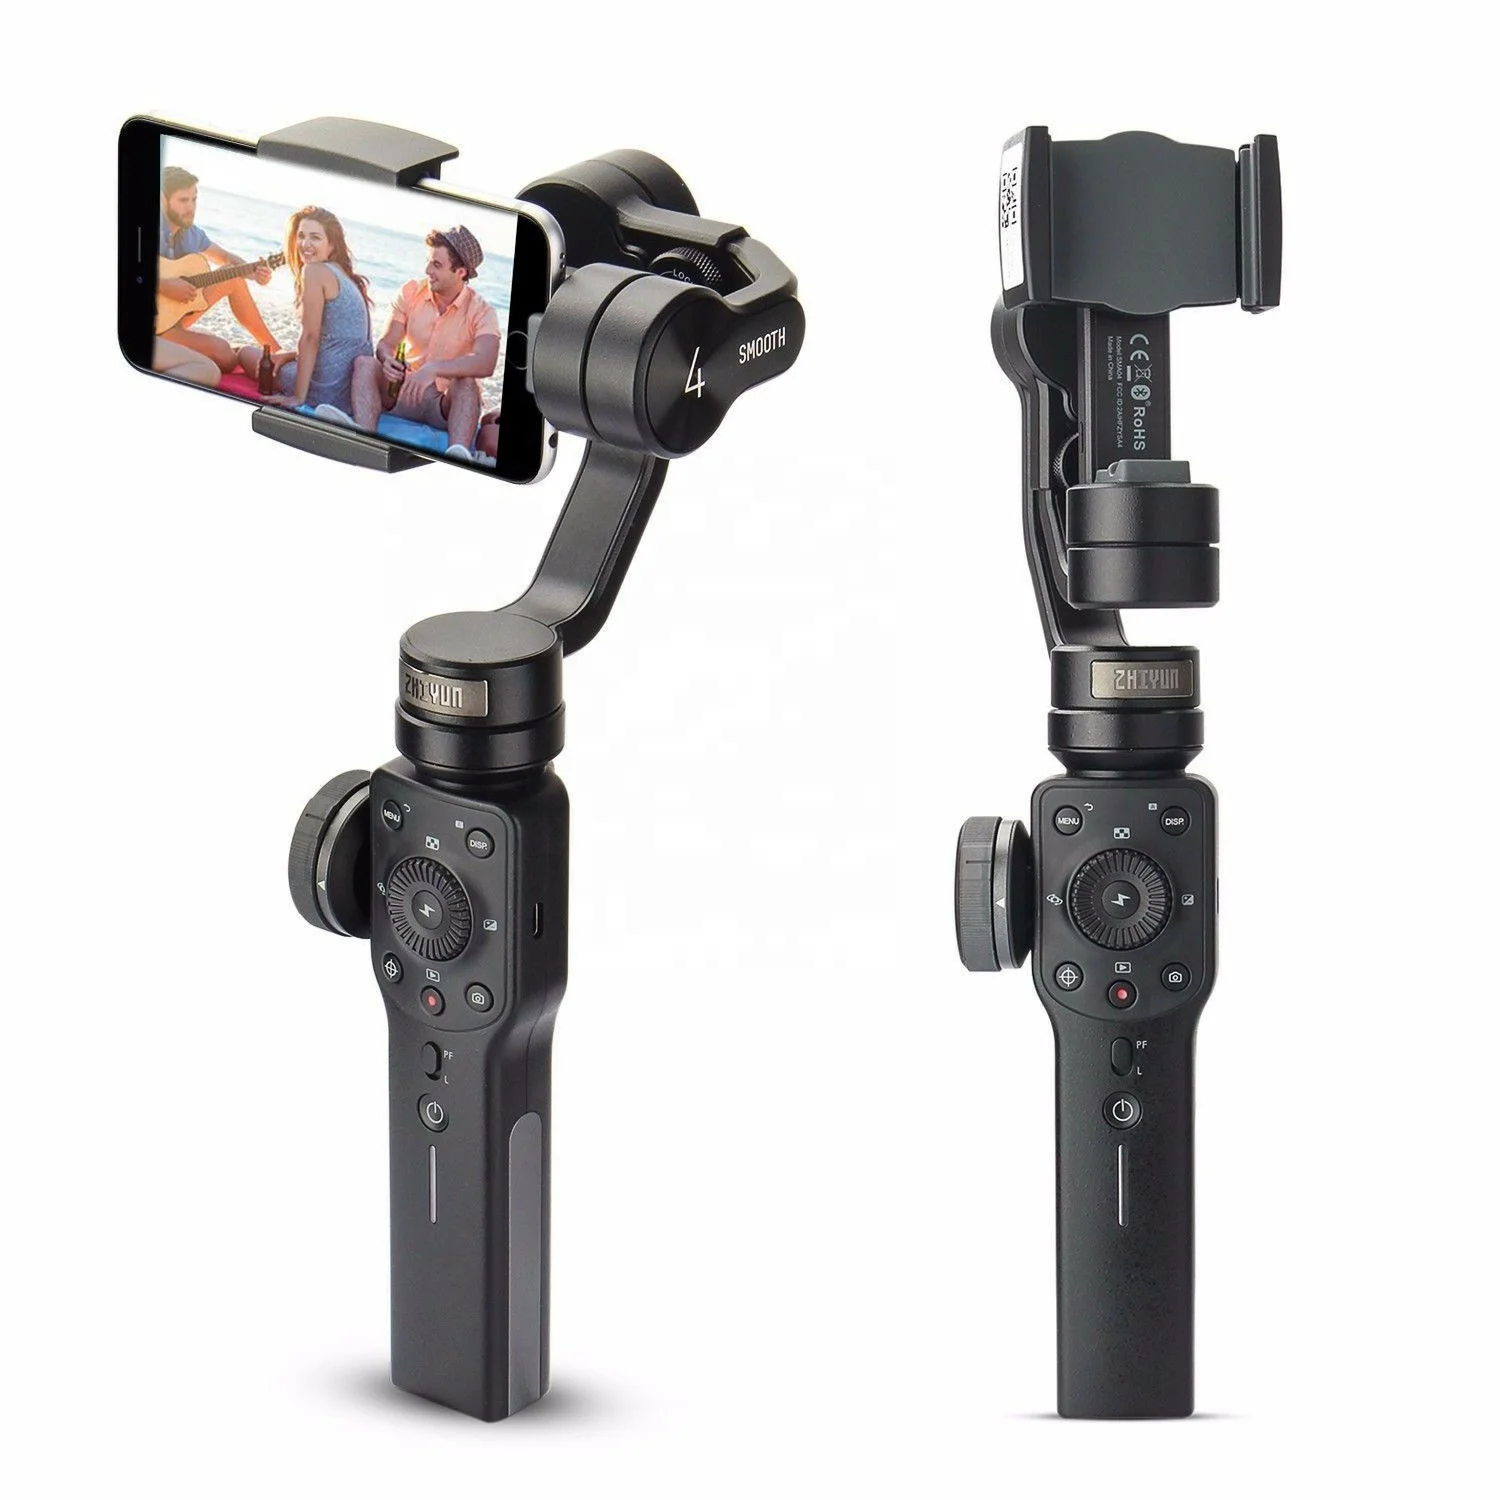 

Zhiyun Smooth 4 3-Axis Handheld Gimbal Stabilizer w/Focus Pull & Zoom For IOS Android Smartphone